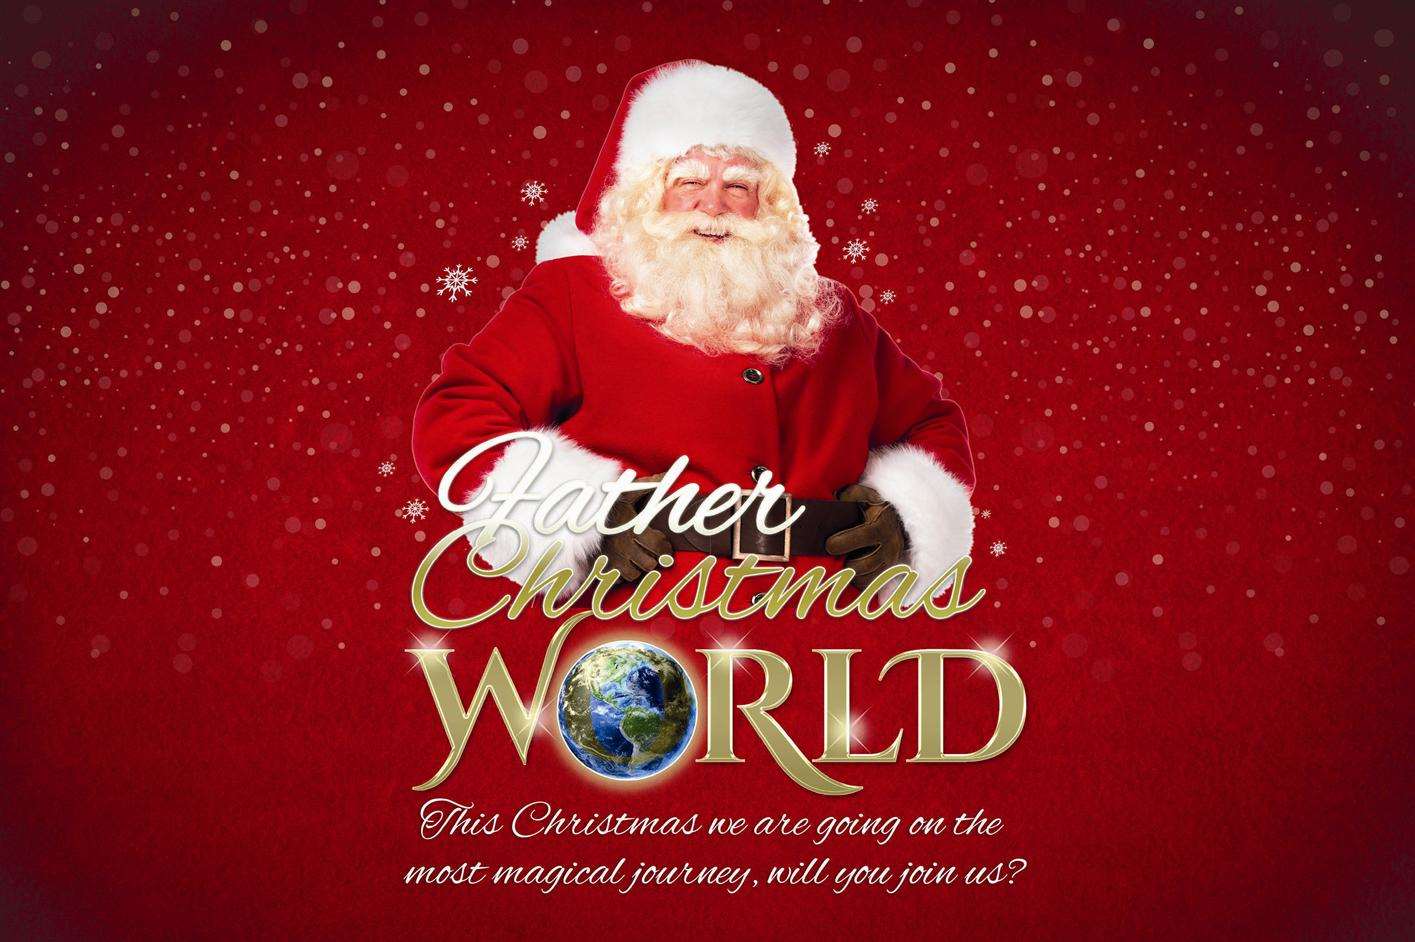 Father Christmas World 2015 was due to open, but plans have been scrapped